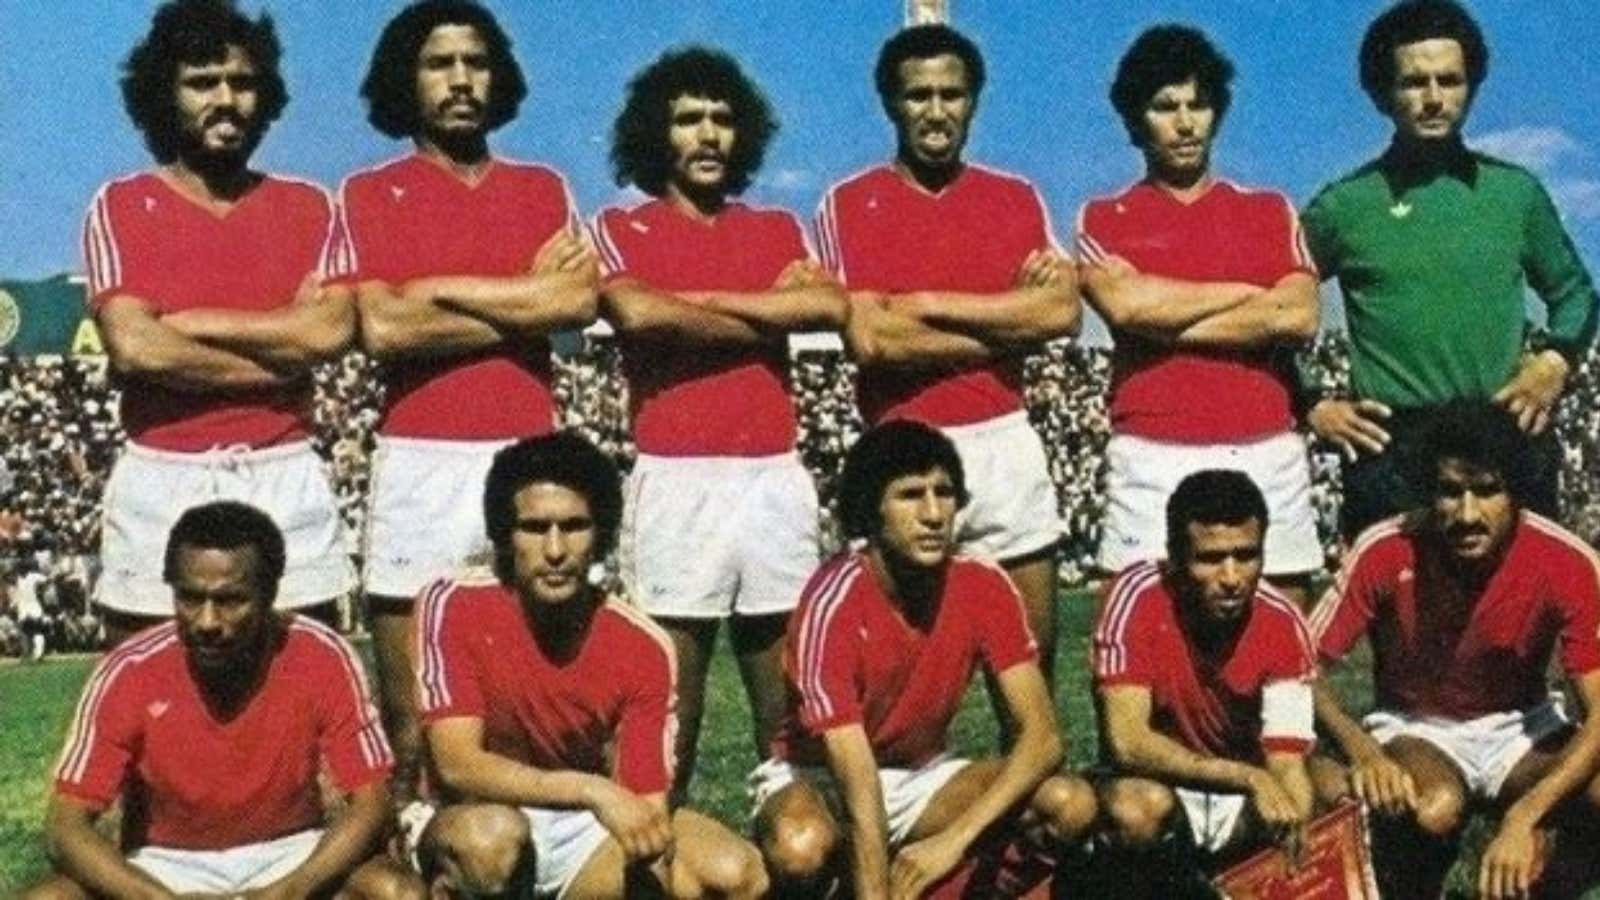 Mahjoub 1976 African Cup of Nations - Morocco